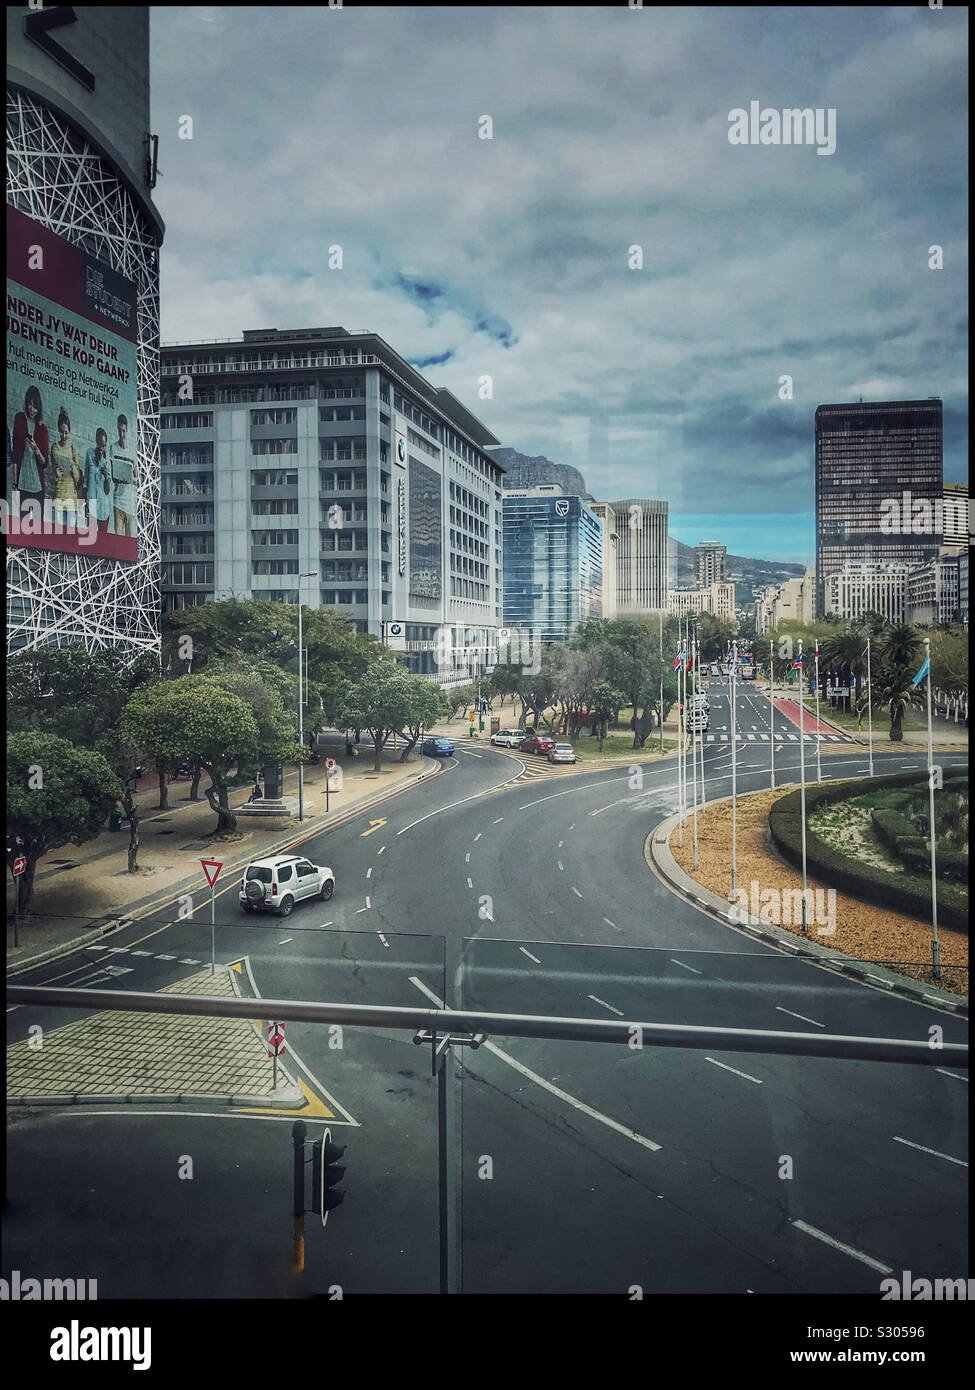 Cape town CBD as seen from CTICC, Foreshore, South Africa. Stock Photo